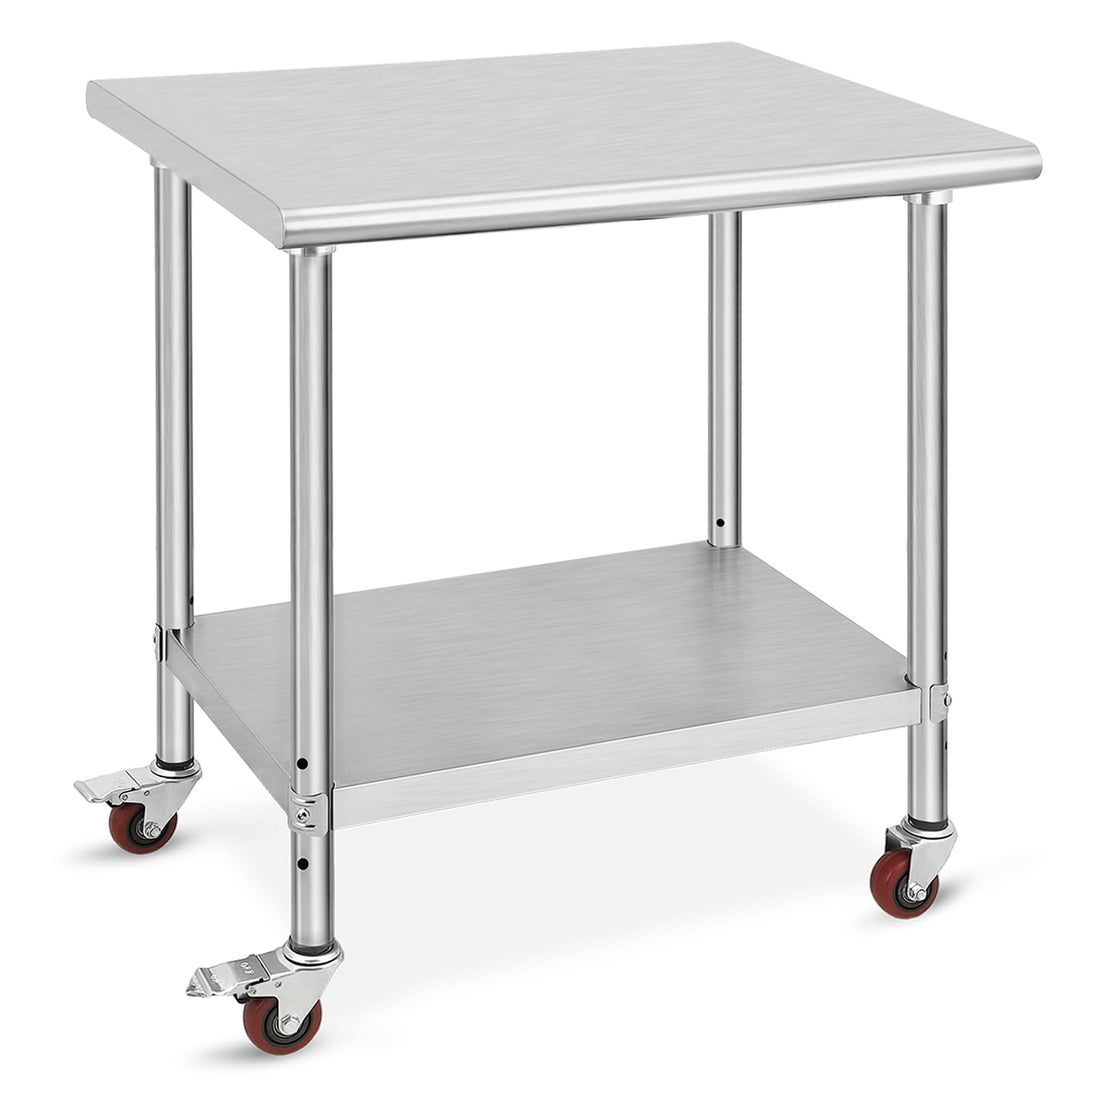 30x24x35 Inch Stainless Steel Table Metal Double Tier Worktable